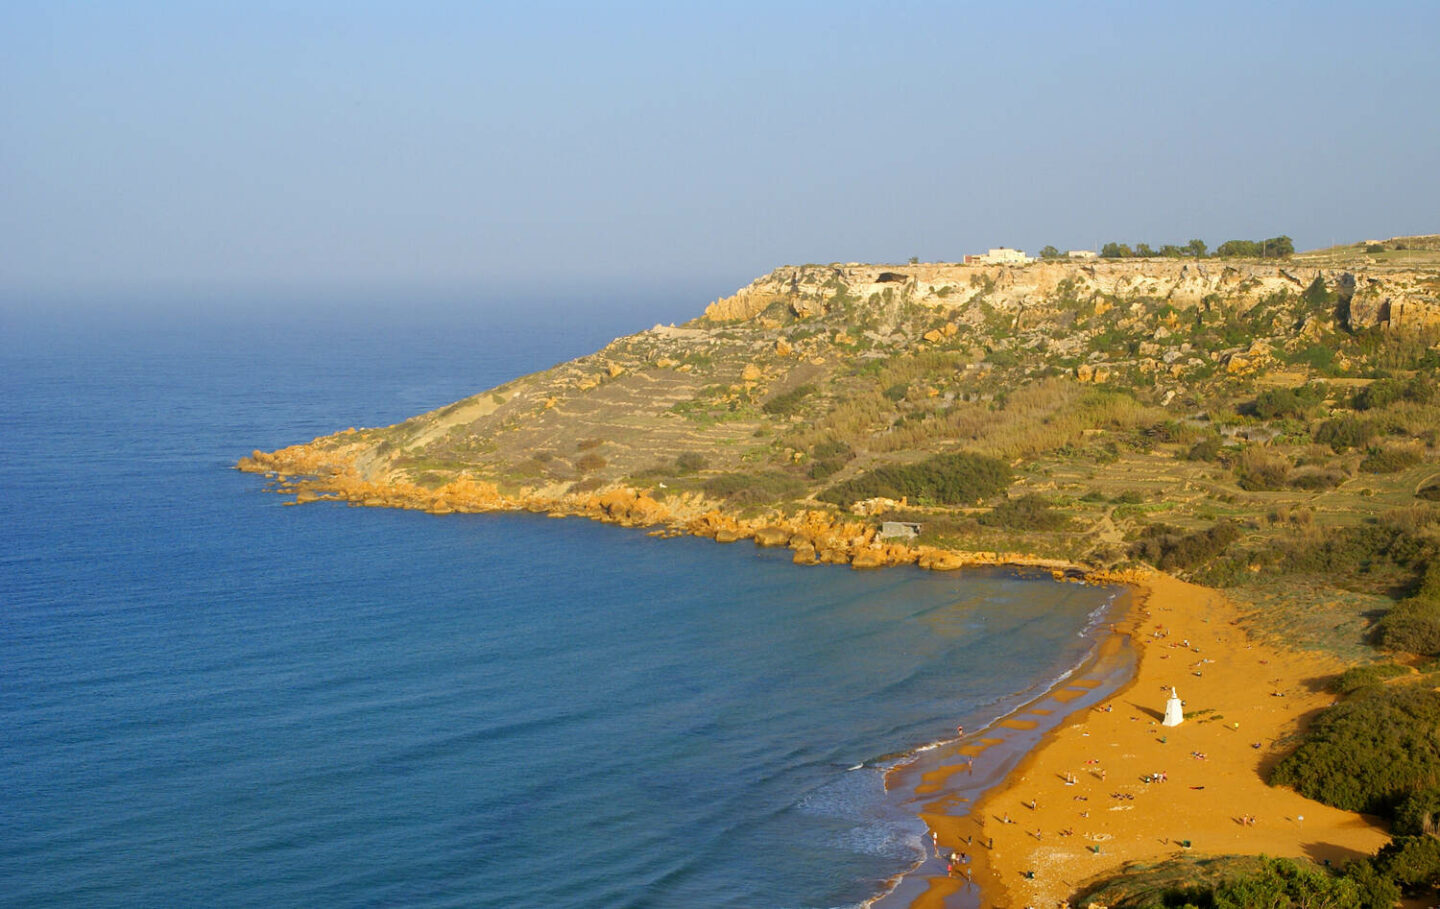 day trip to Gozo, Gozo day trip, one day in Gozo, a day in Gozo, day trips to Gozo, Gozo day trip from Valletta, Gozo itinerary, day trip to Gozo from Valletta, day trip to Gozo from St. Julian's, day trip to Gozo and Comino,